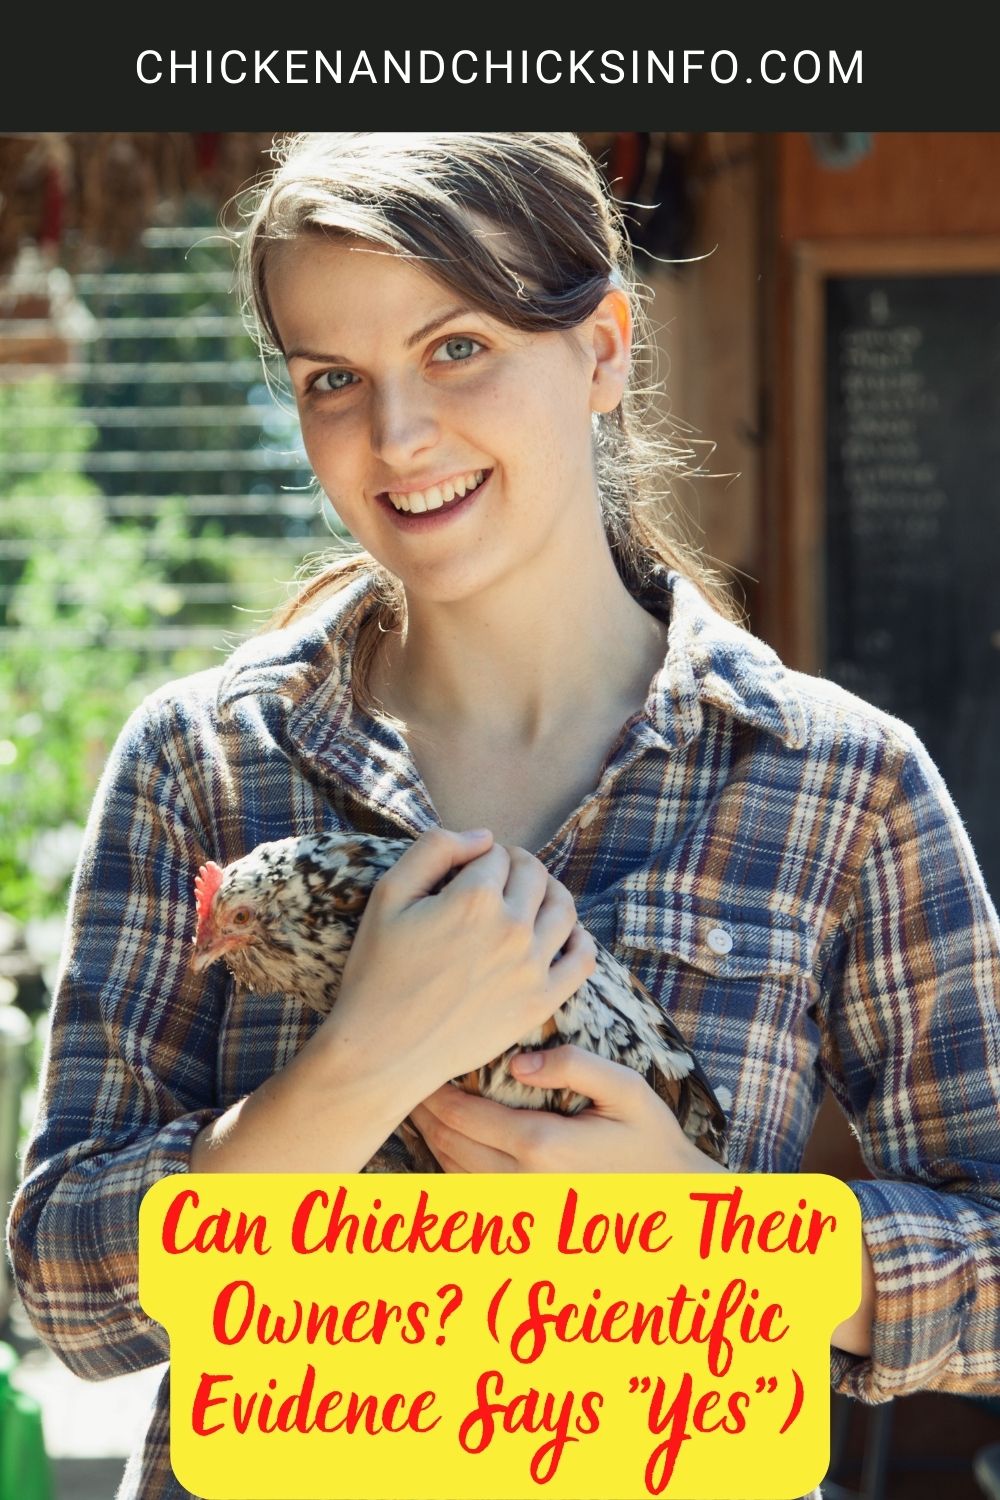 Can Chickens Love Their Owners? (Scientific Evidence Says "Yes") poster.
